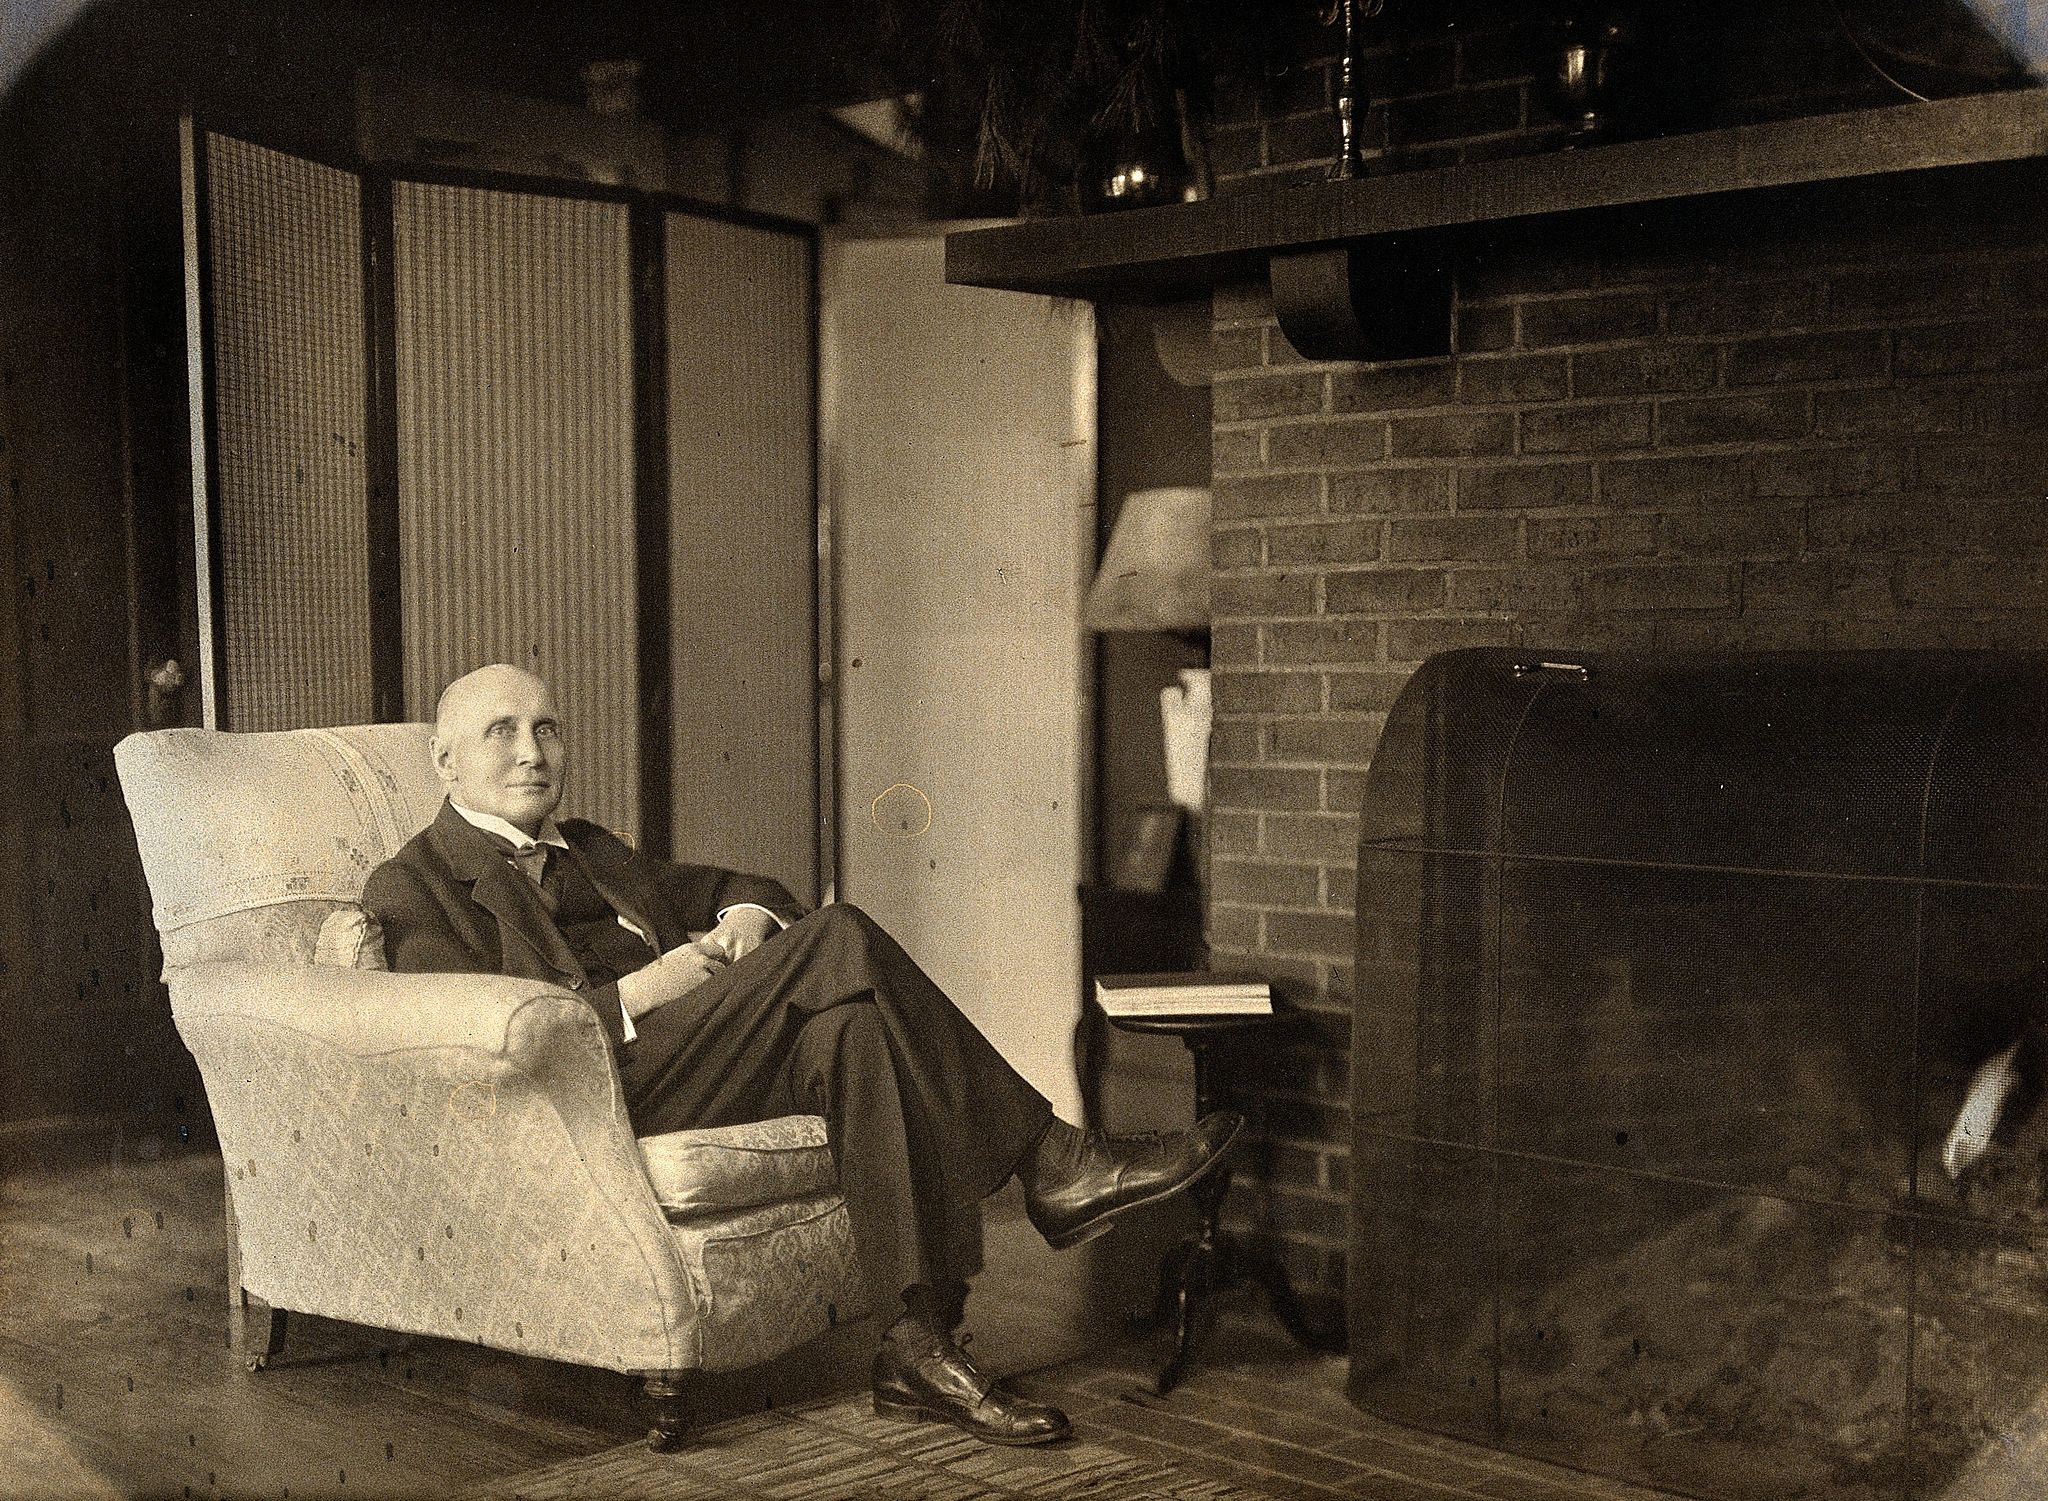 Alfred North Whitehead Photograph from Wellcome Images, CC-by